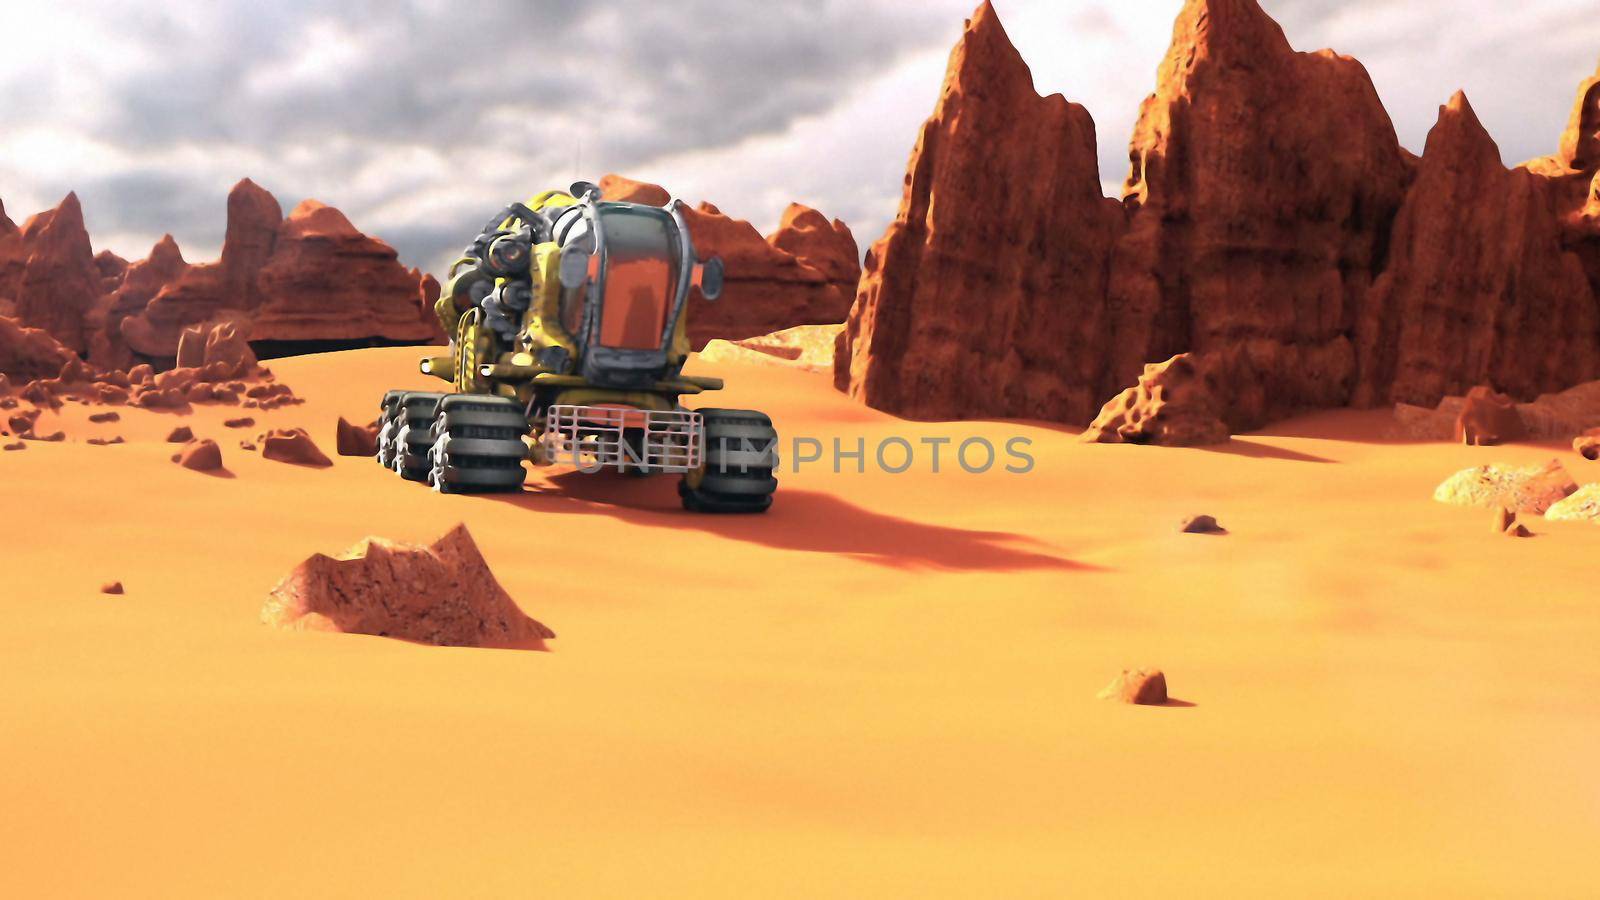 Mars Rover on the Mars. A futuristic concept of a colonization of Red Planet.